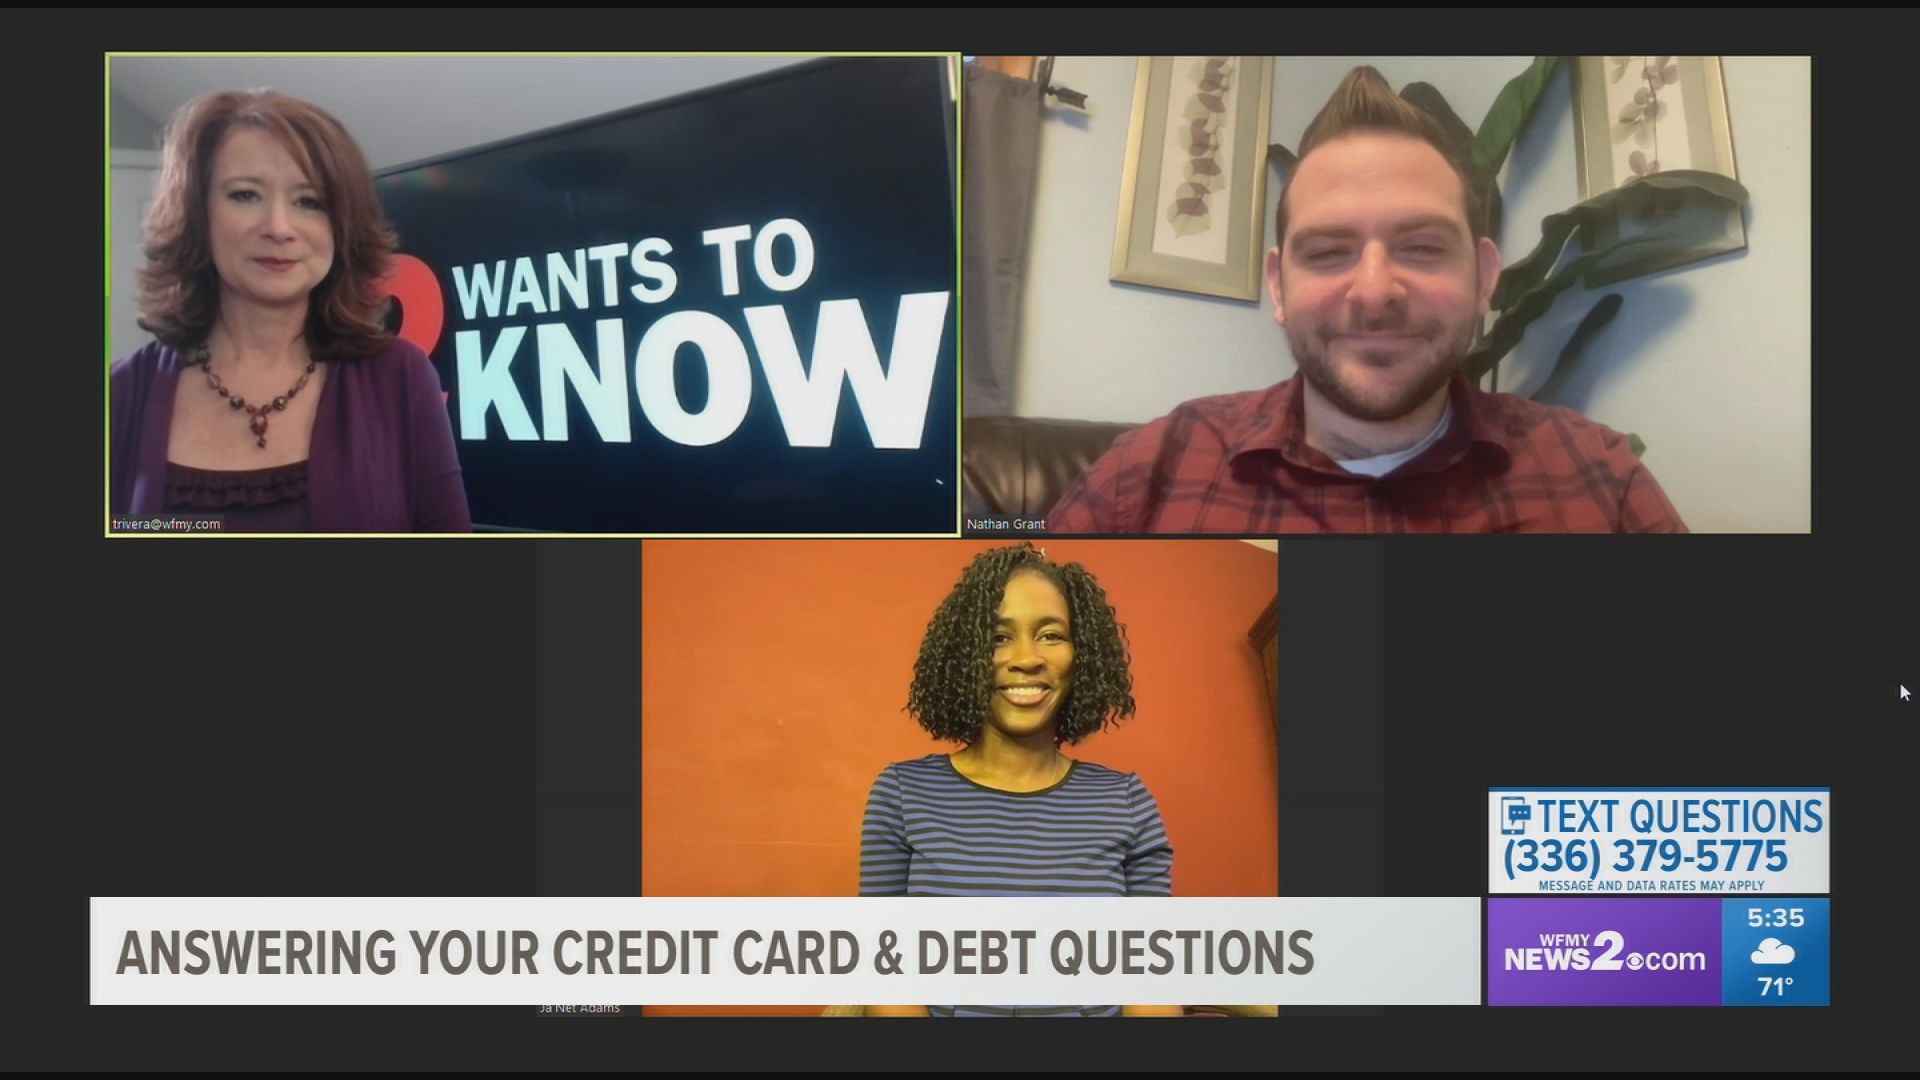 Experts Nathan Grant and Ja’Net Adams explain ways to deal with debt, credit cards, and finances.